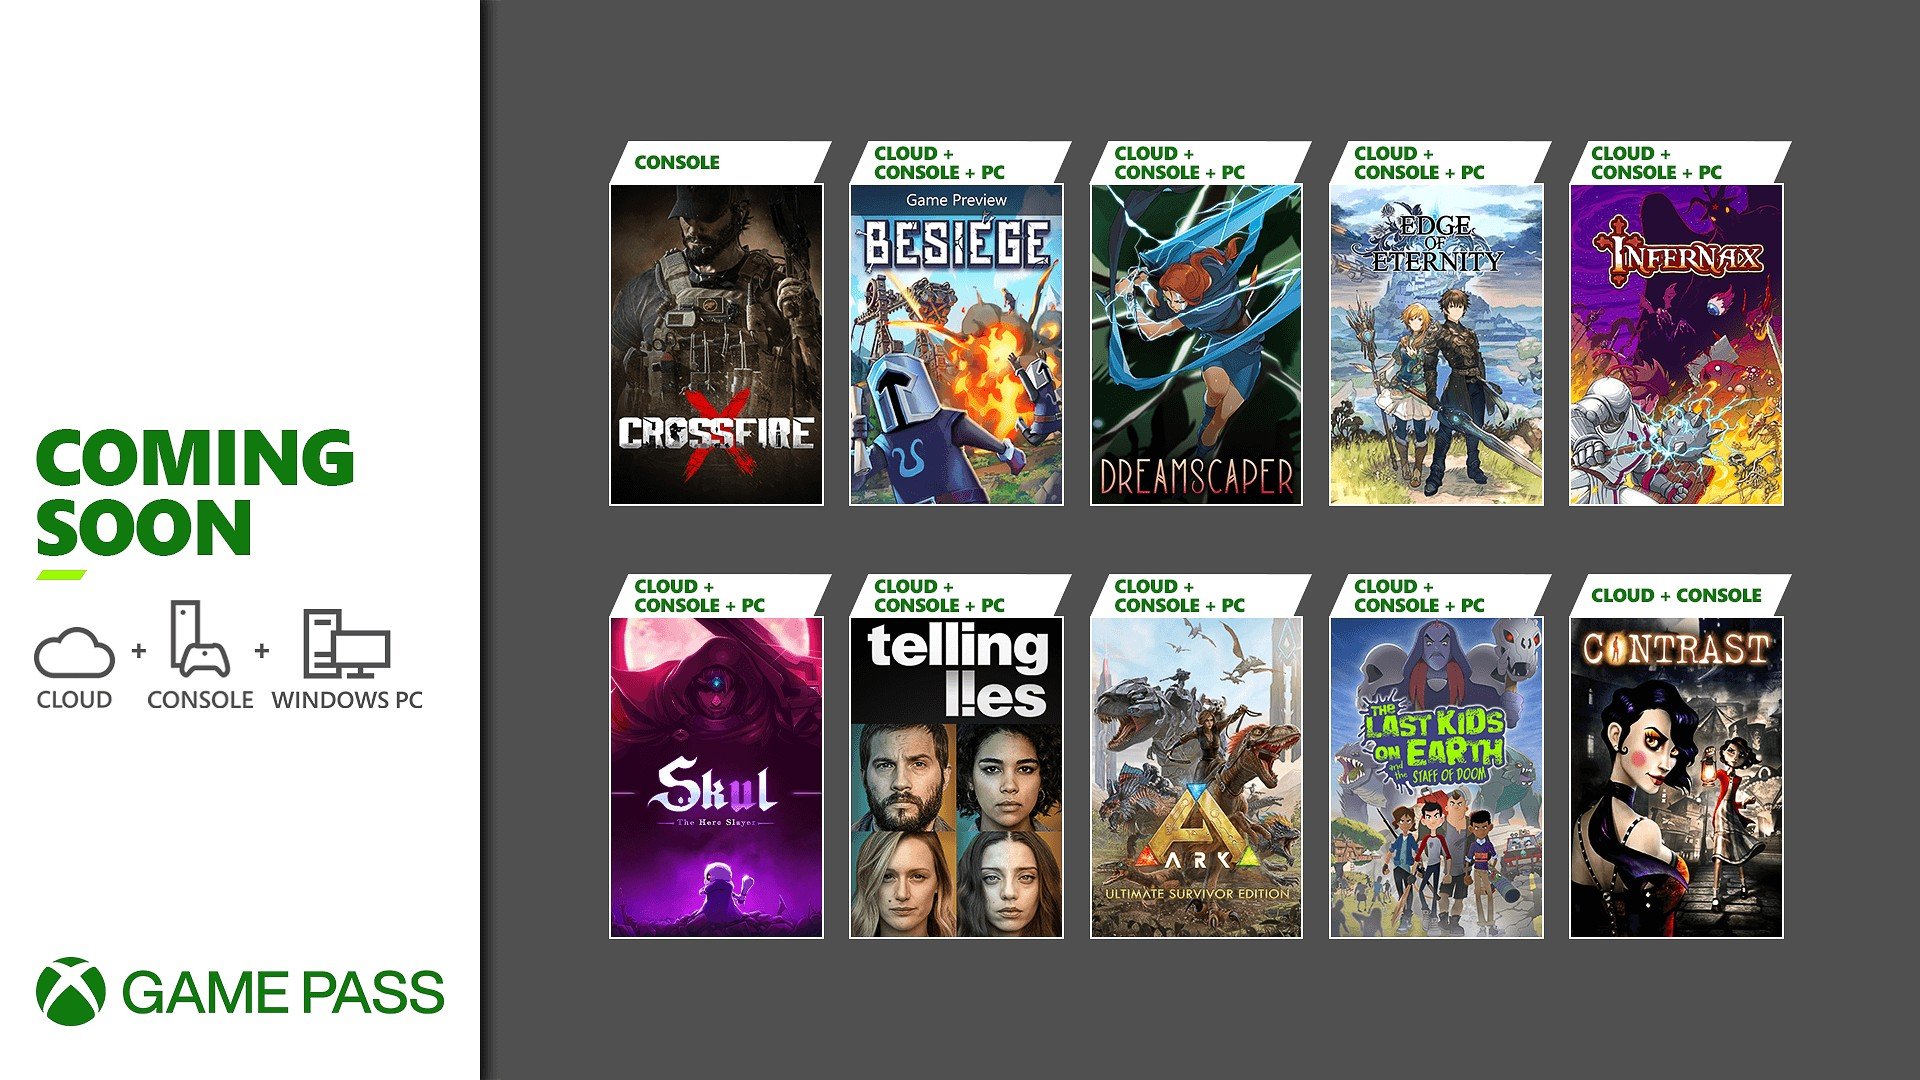 Xbox Game Pass Now Includes Exclusive Xbox Games at Launch